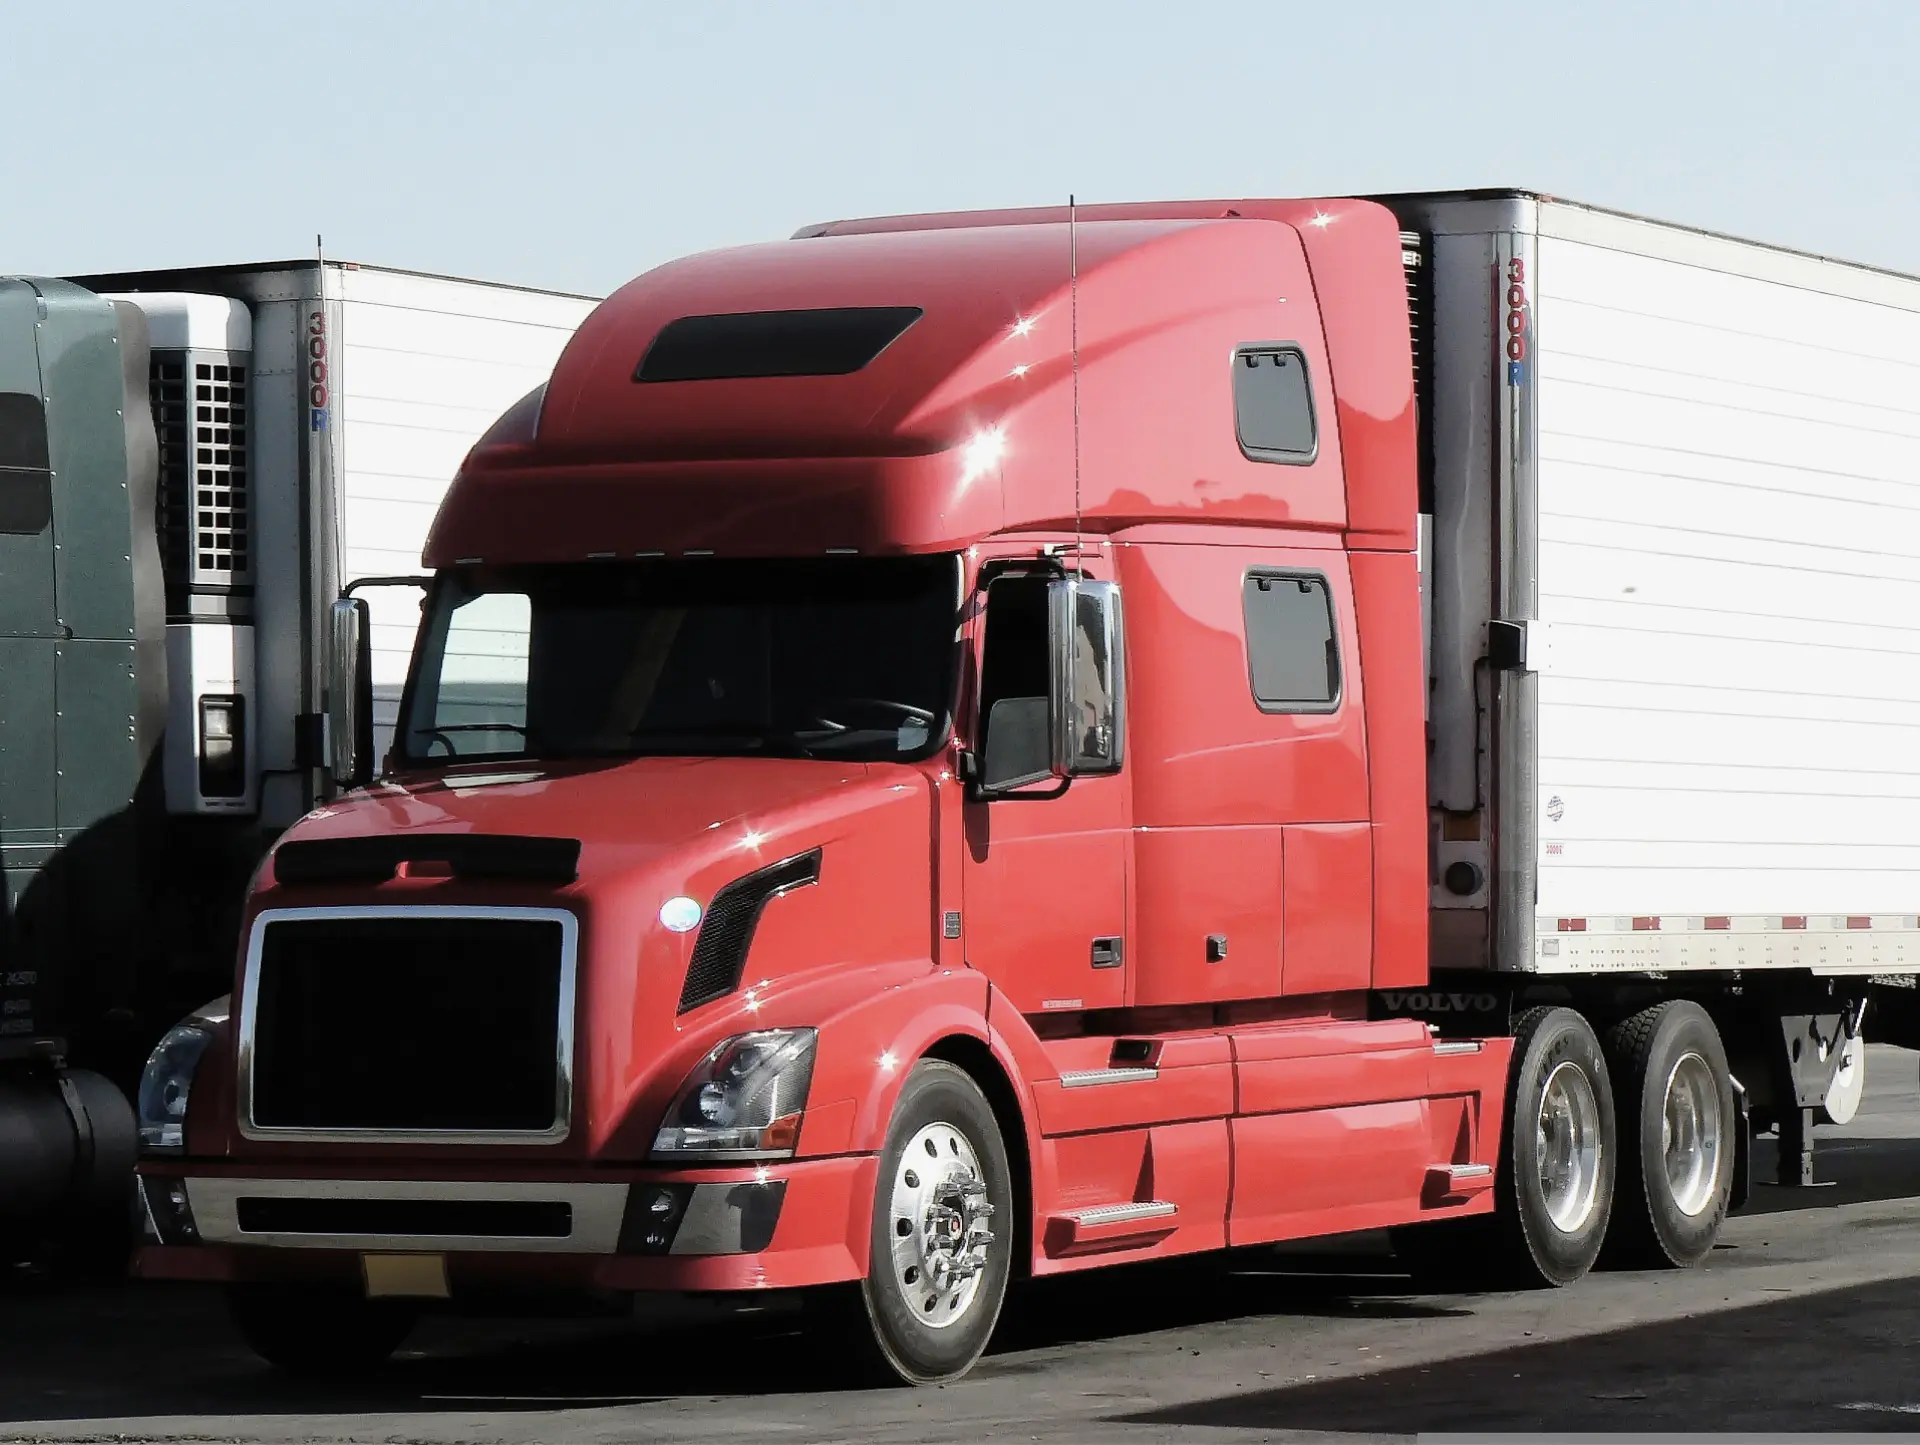 Food-Grade Trailers: Freight Is Carried for All to Savor